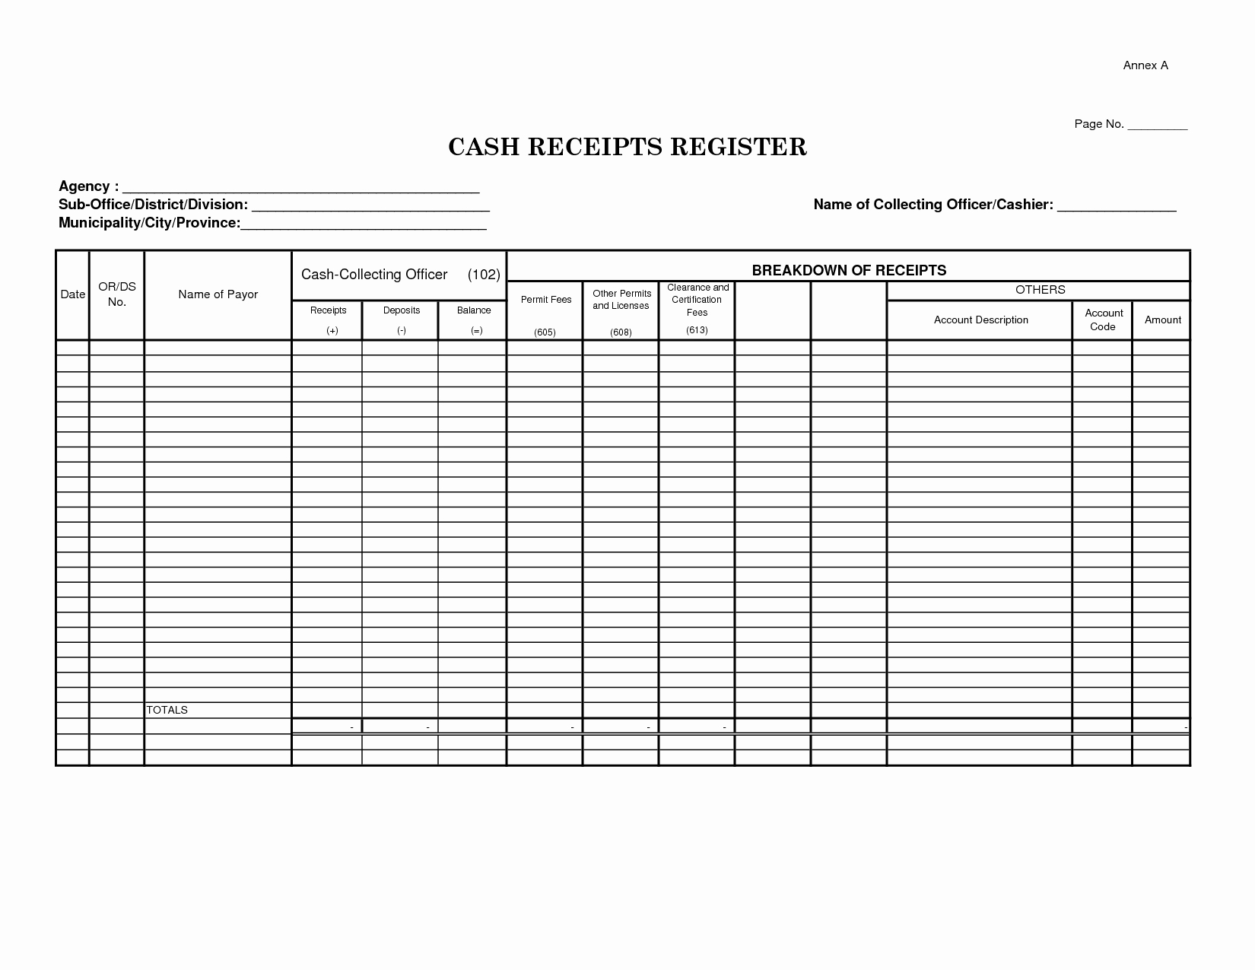 free-accounting-worksheets-excel-spreadsheet-template-free-accounting